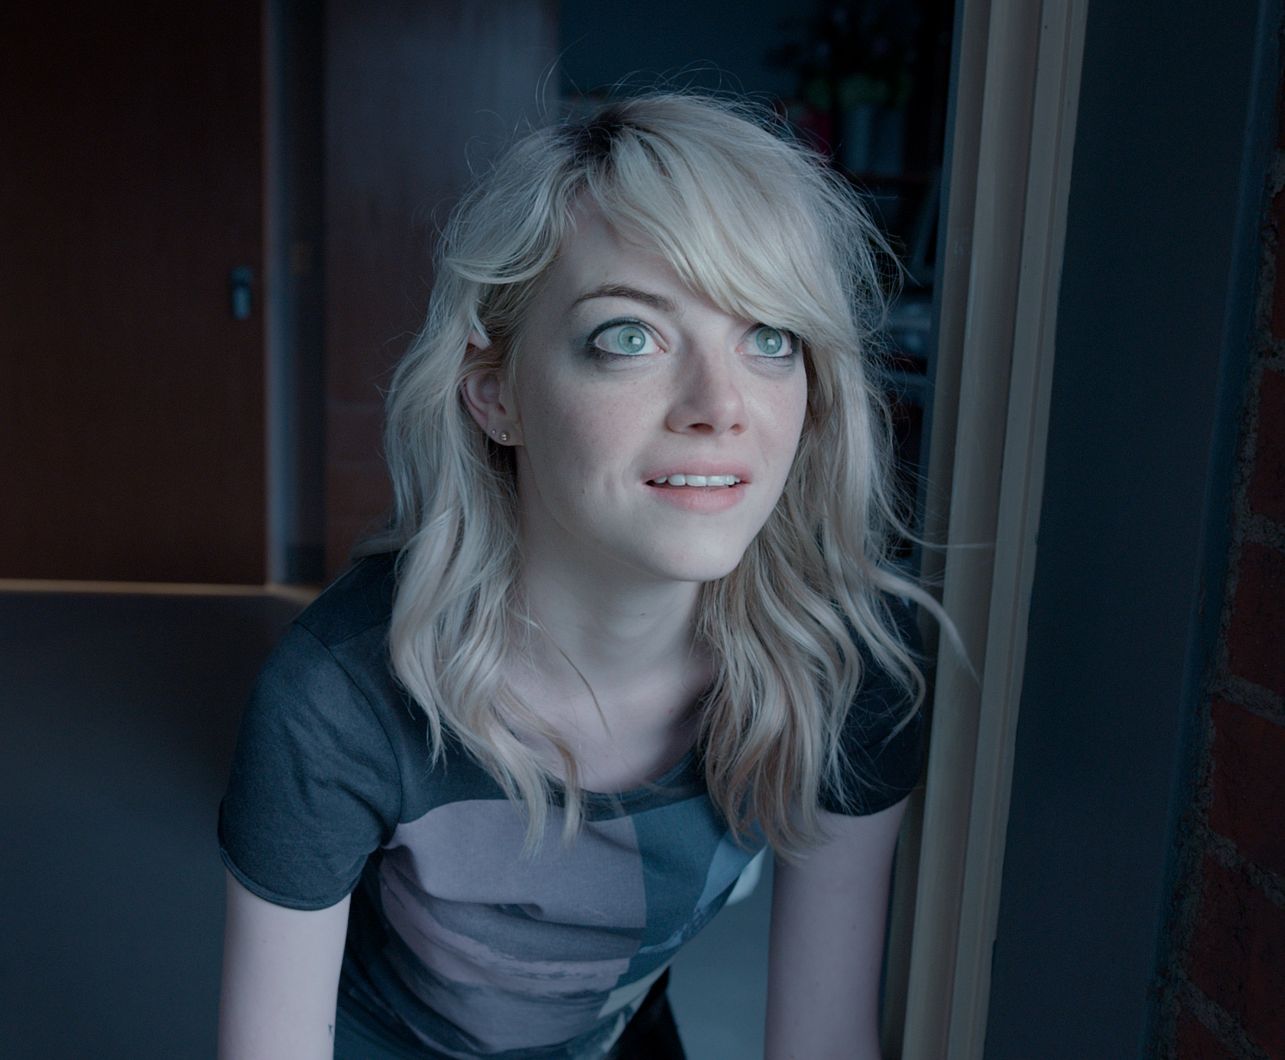 Emma Stone with extremely green eyes in Birdman